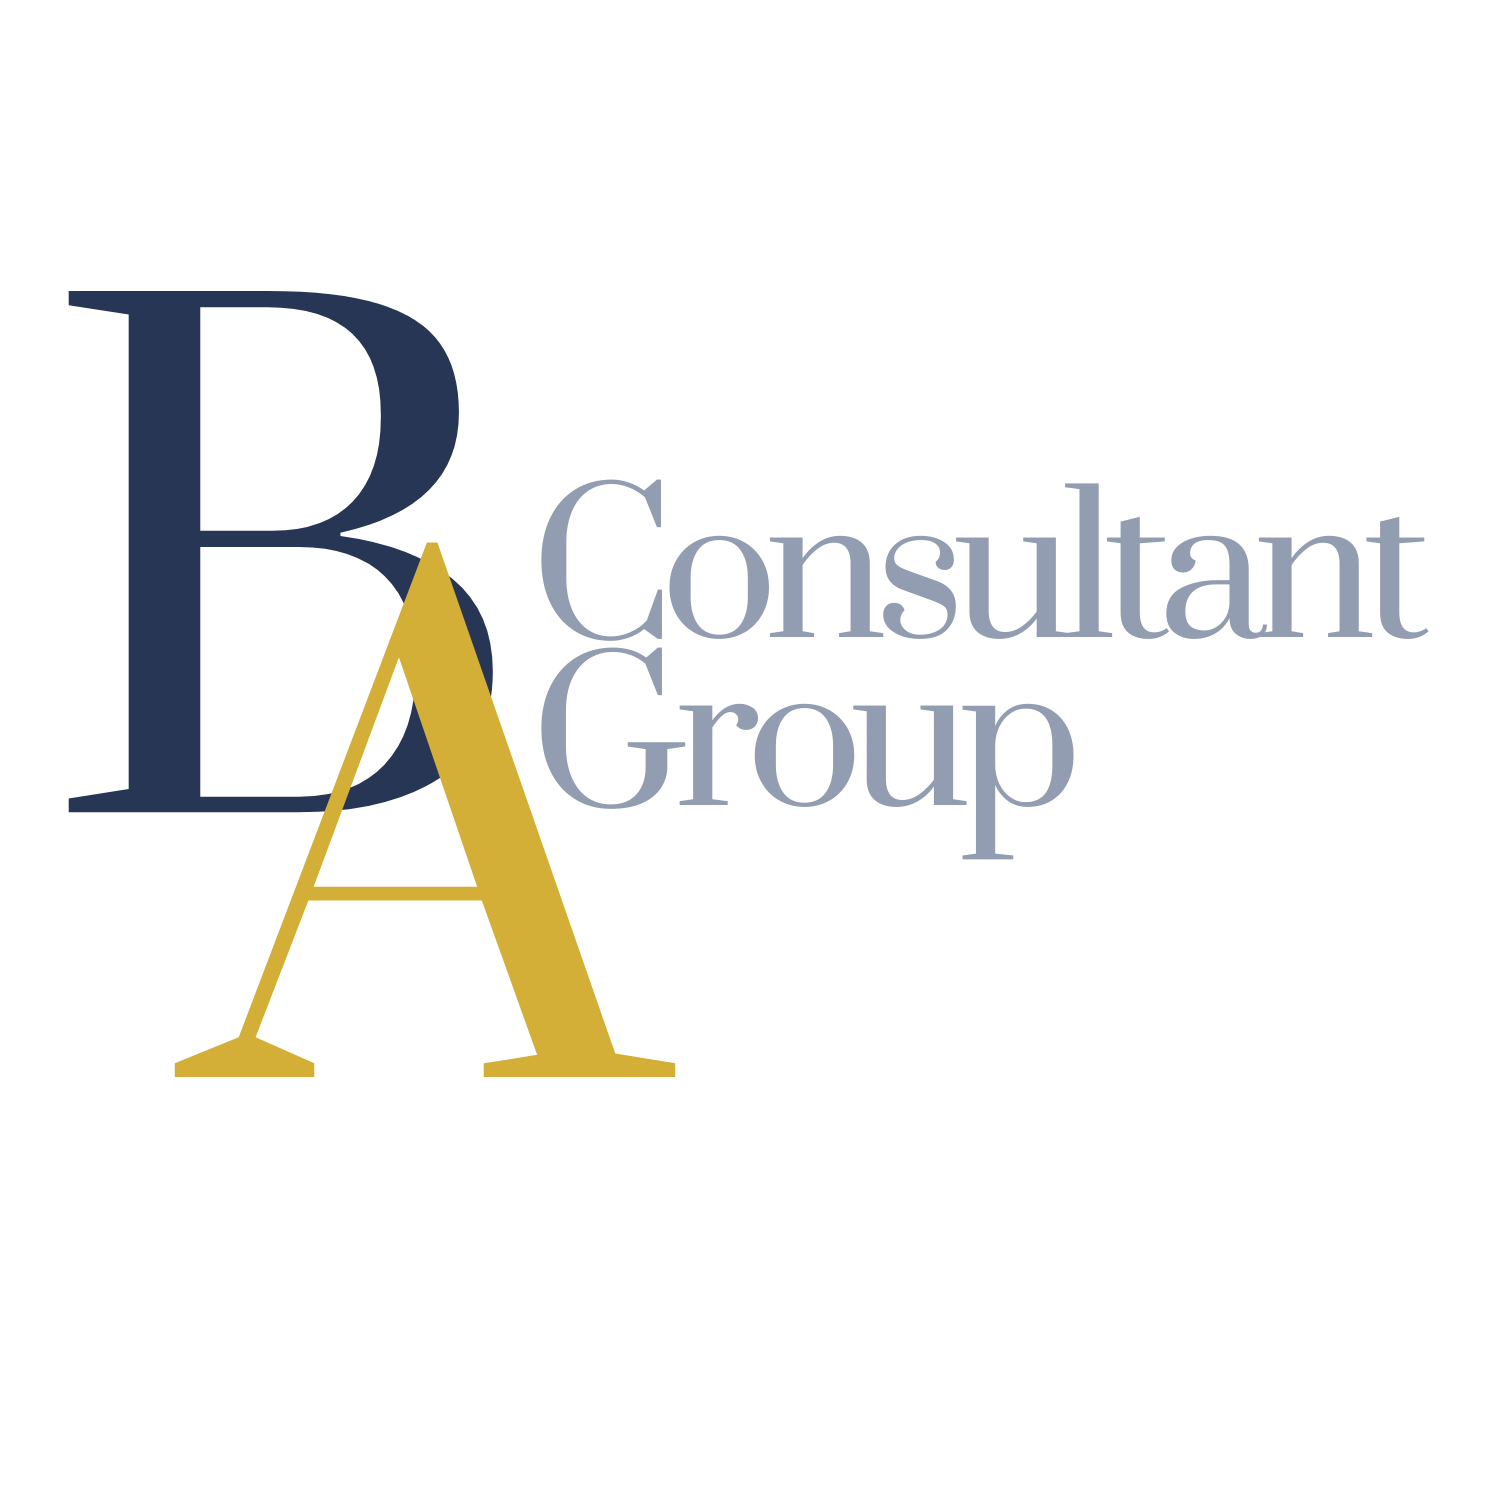 BA Consultant Group